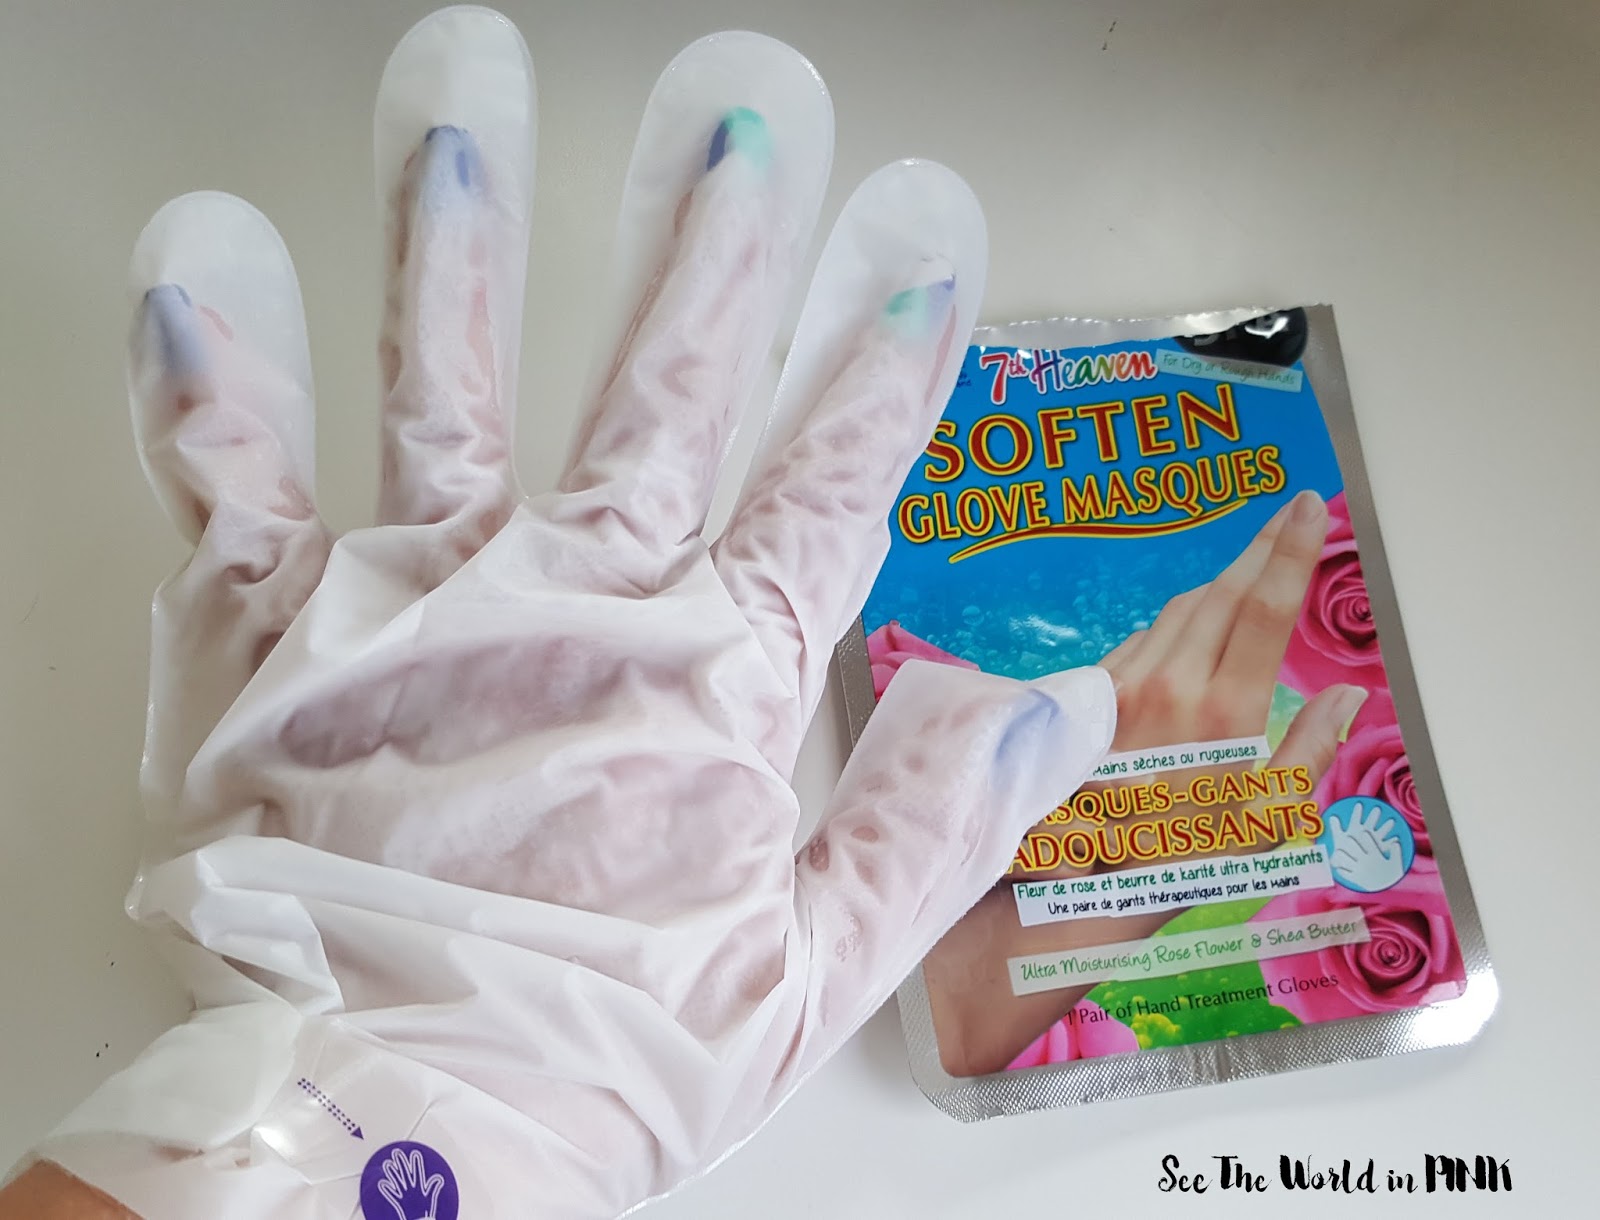 Mask Wednesday - Montagne Jeunesse 7th Heaven Soften Glove Masques